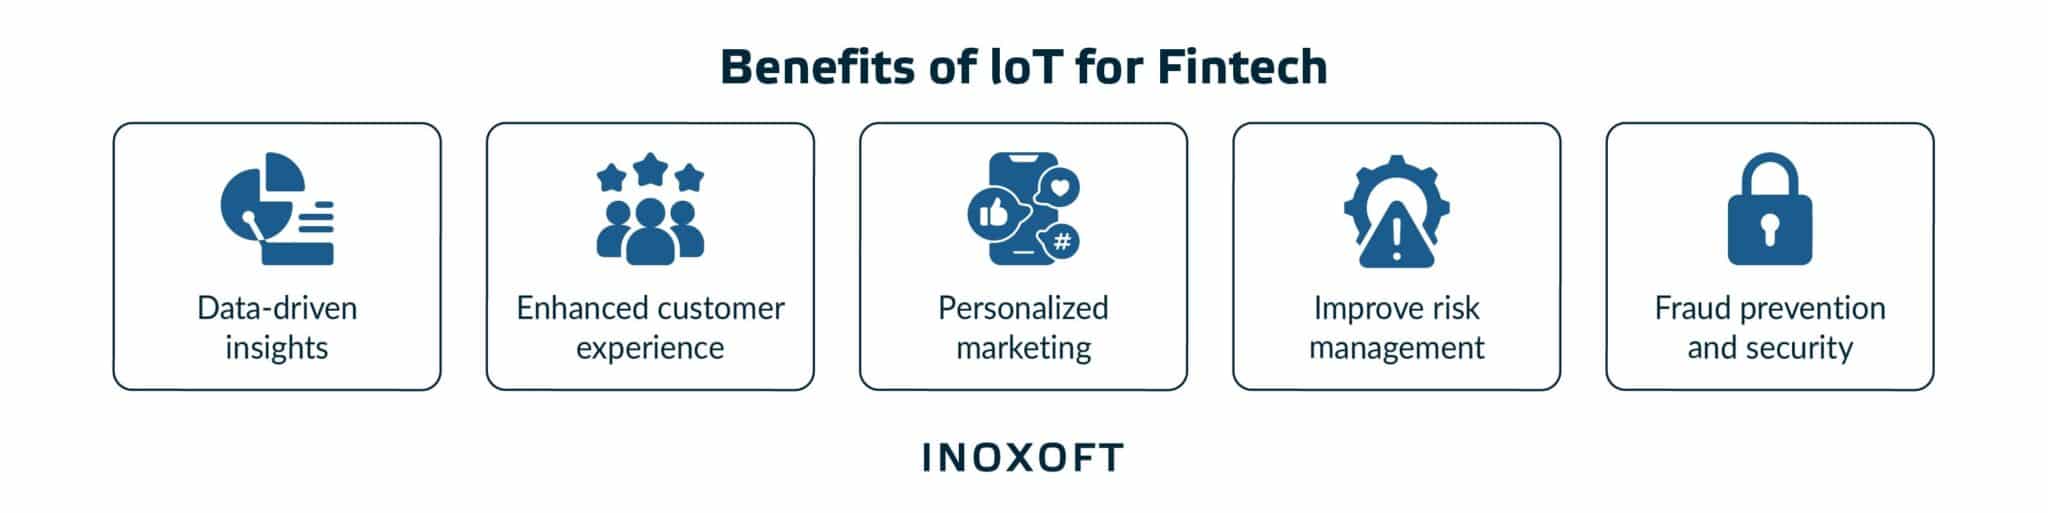 Benefits of IoT for Fintech